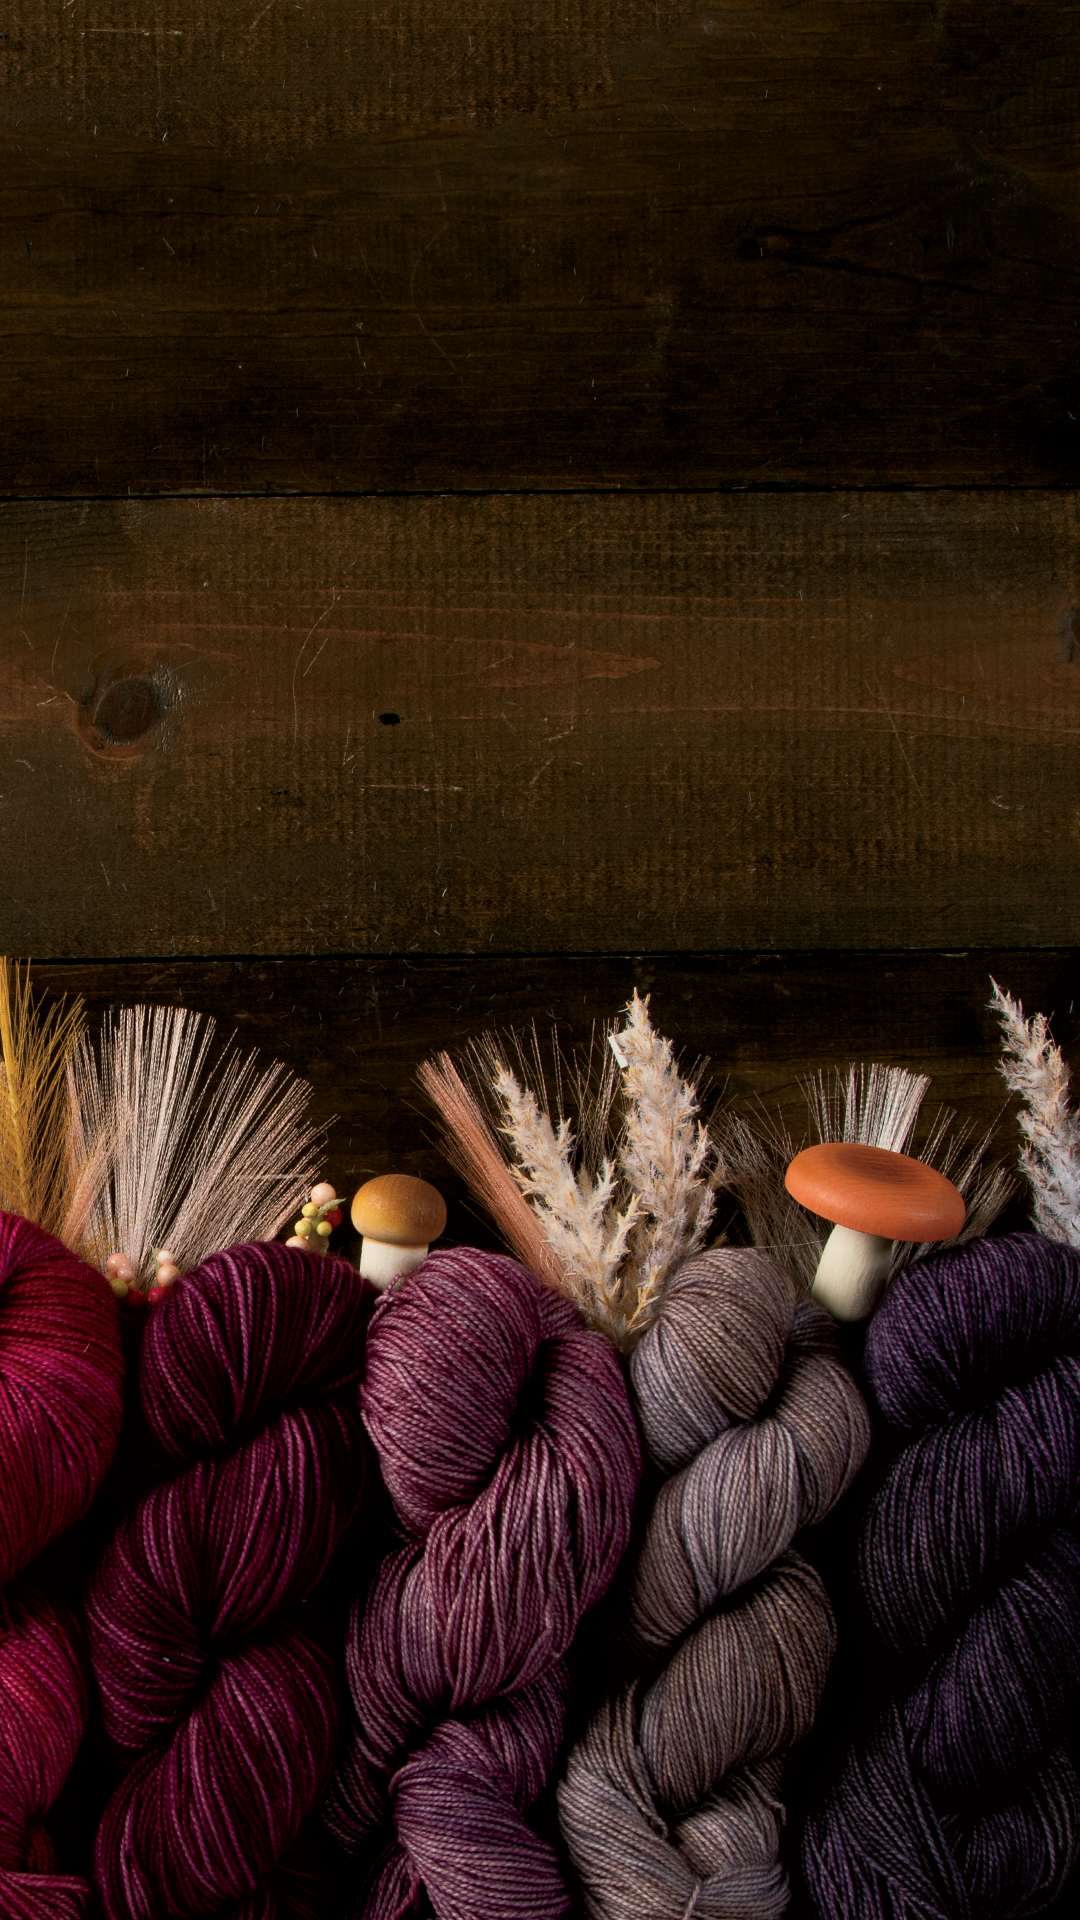 A dark wood background with assorted pink and purple hanks of yarn decorated with mushrooms and wheat.